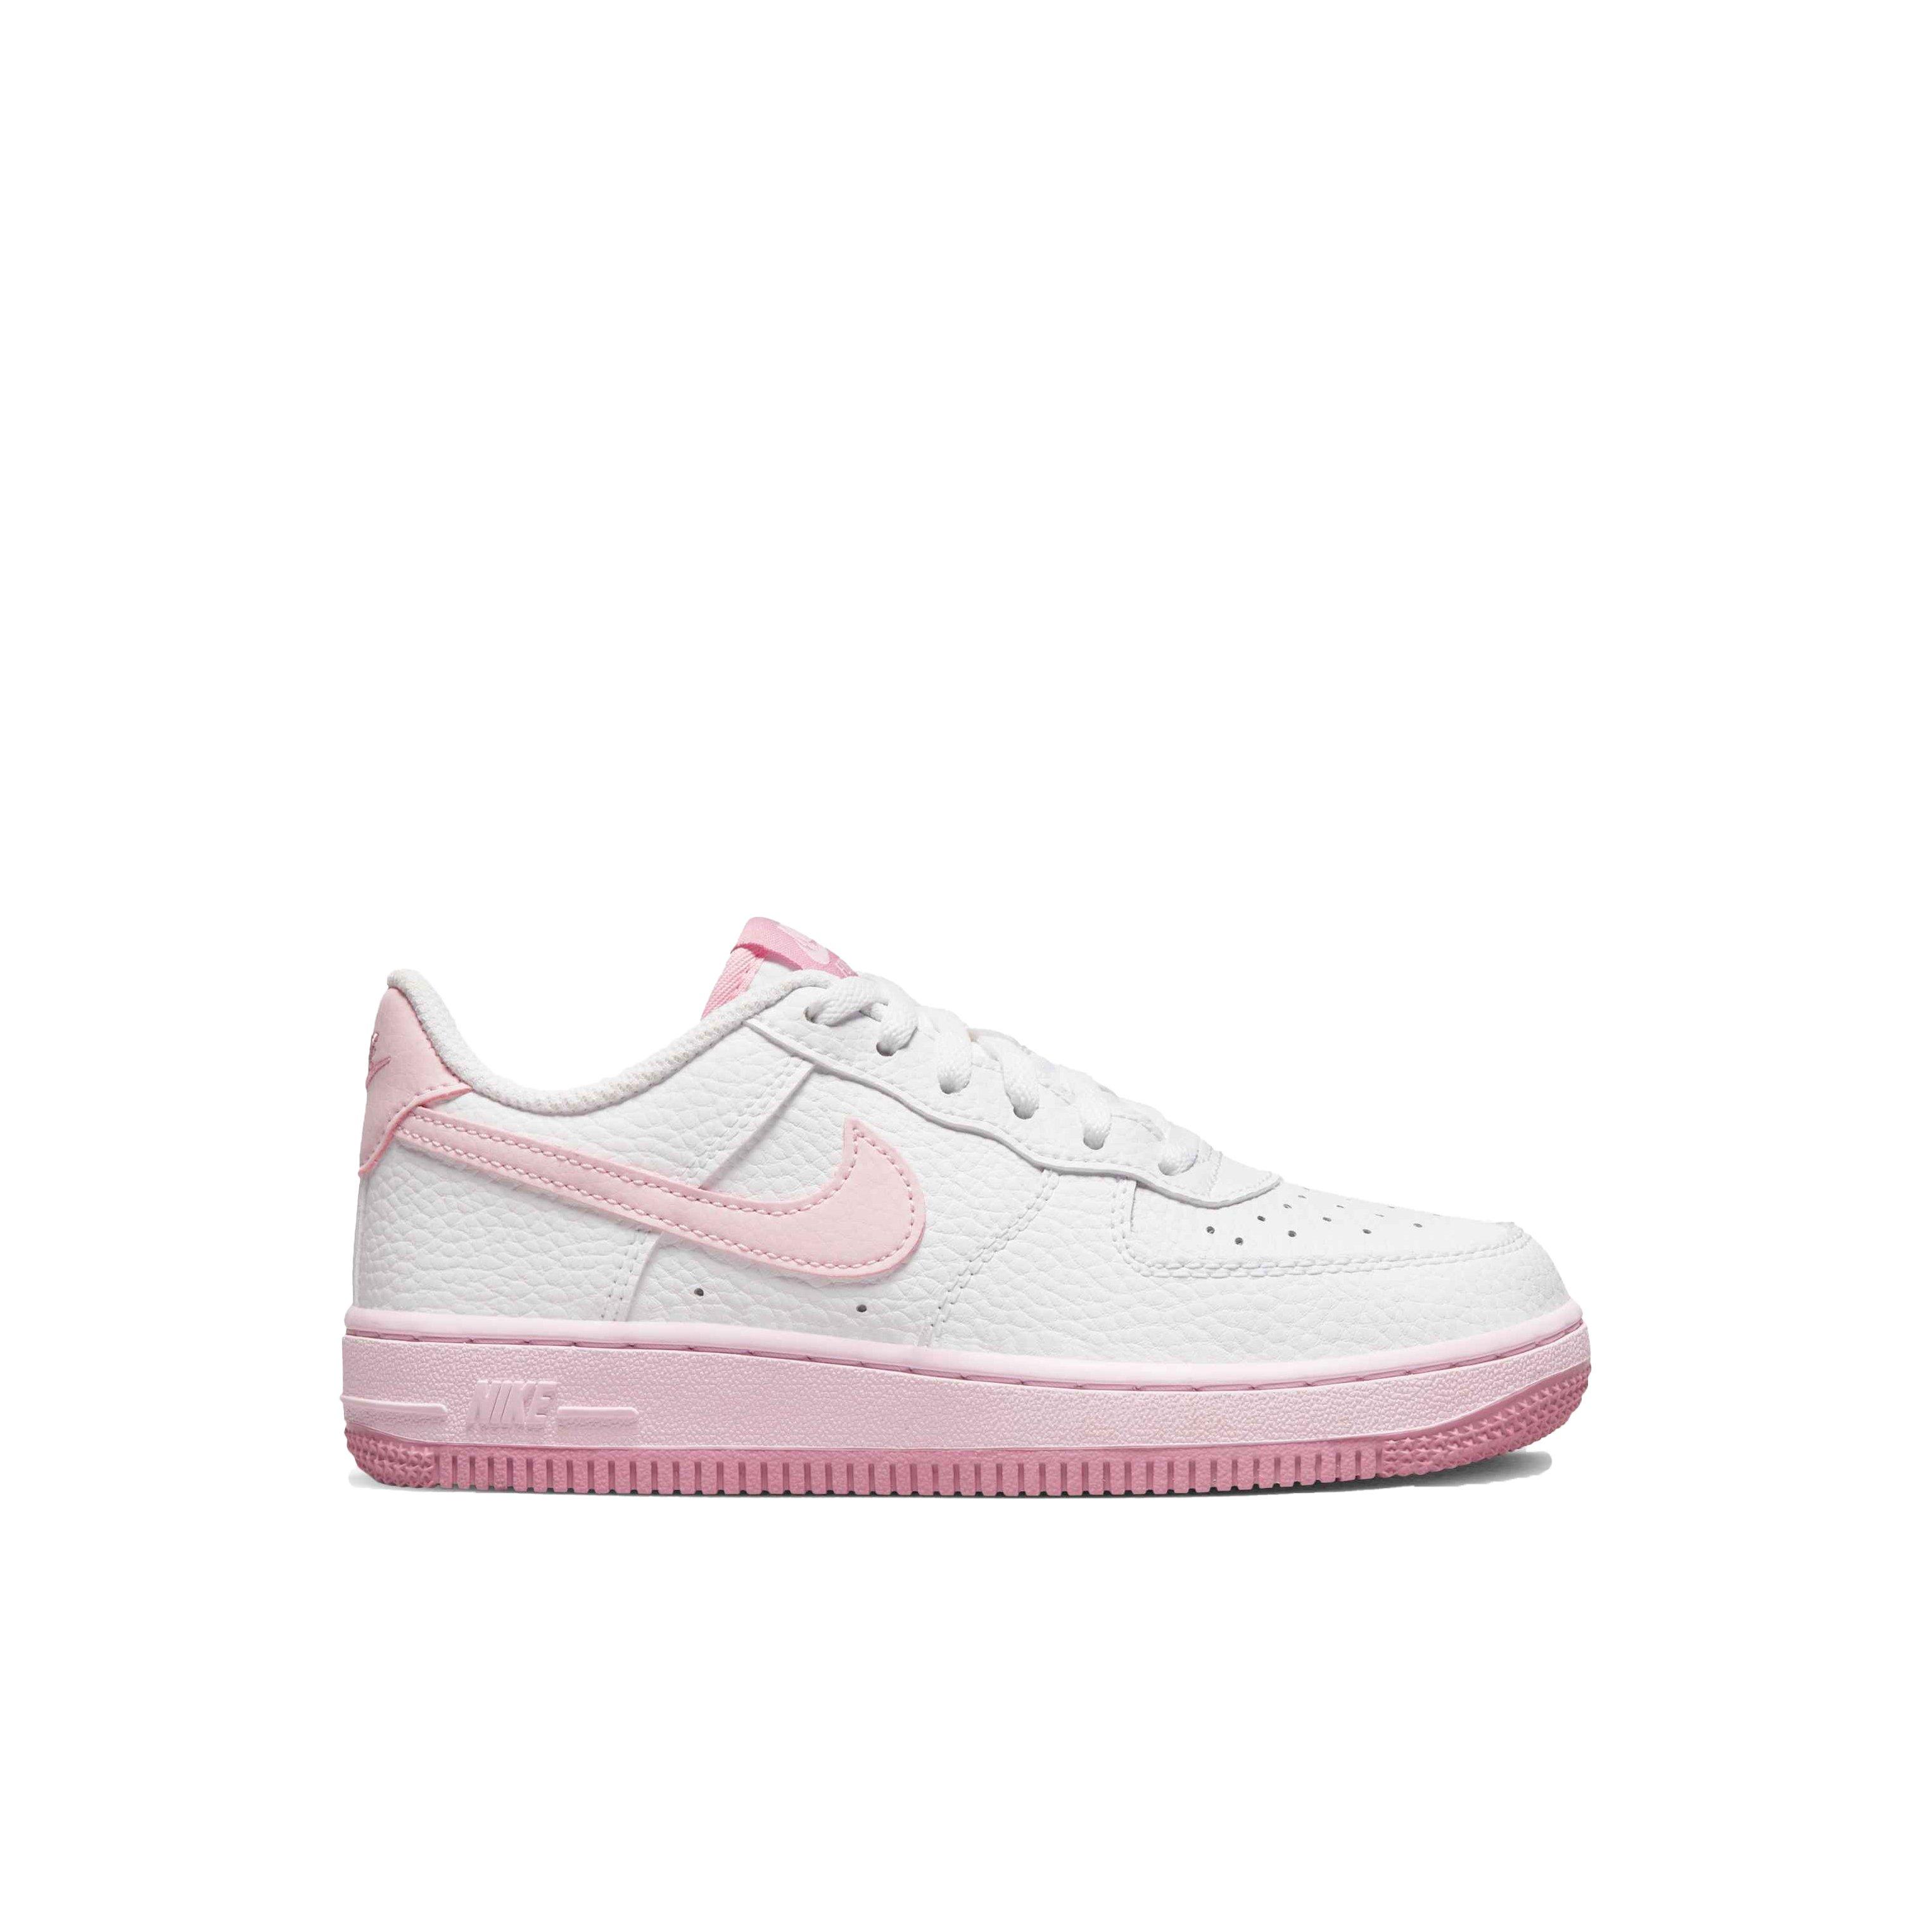 pink and white air force 1 size 4